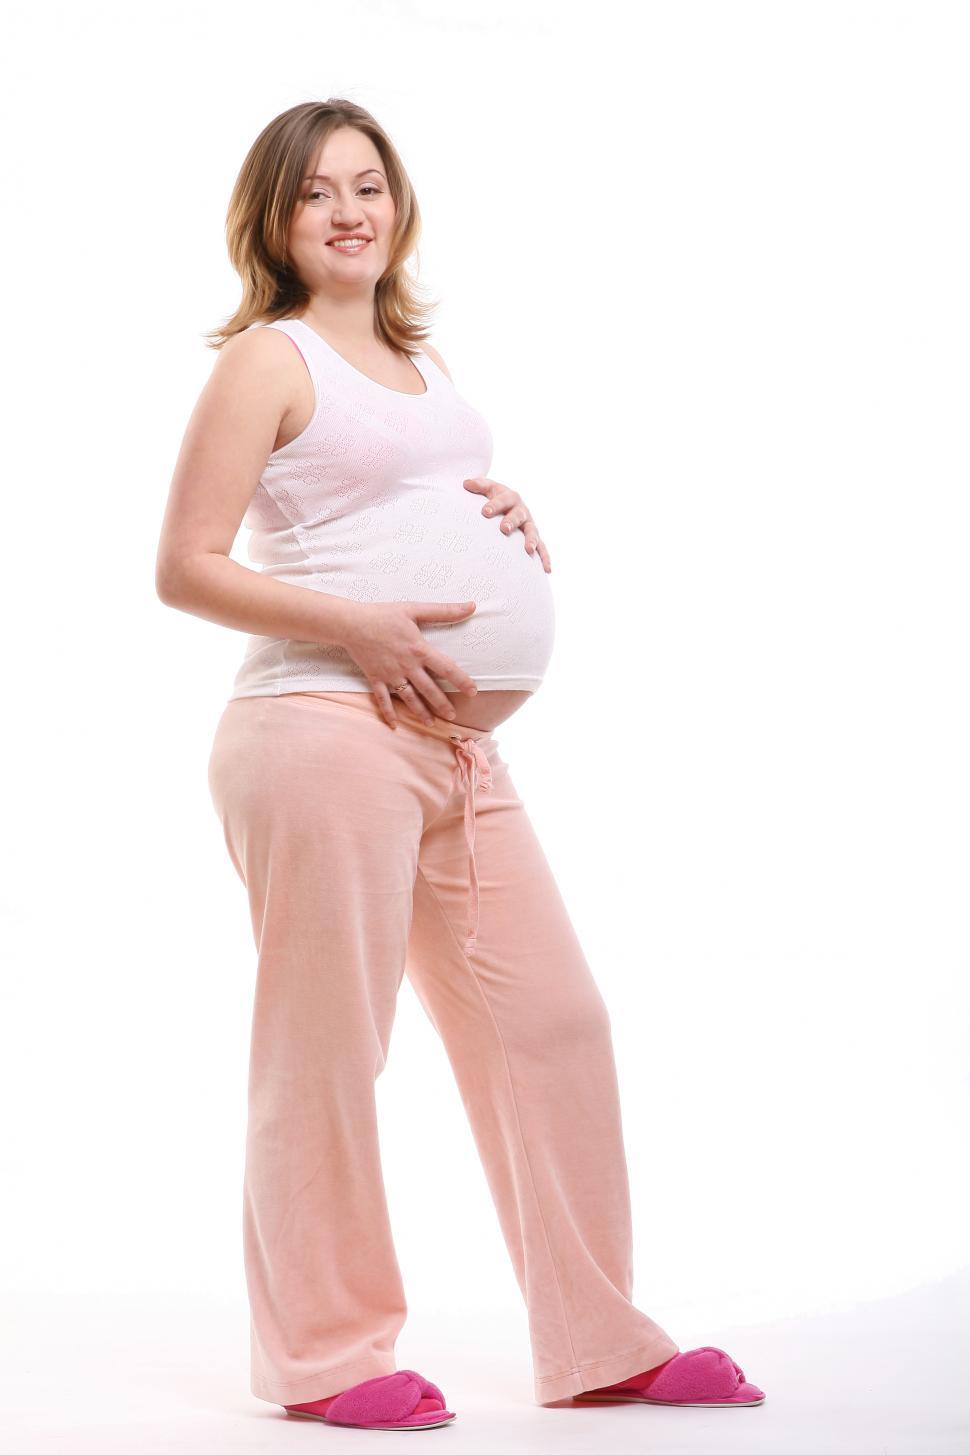 Free Image of happy pregnant young woman with hands on her belly 